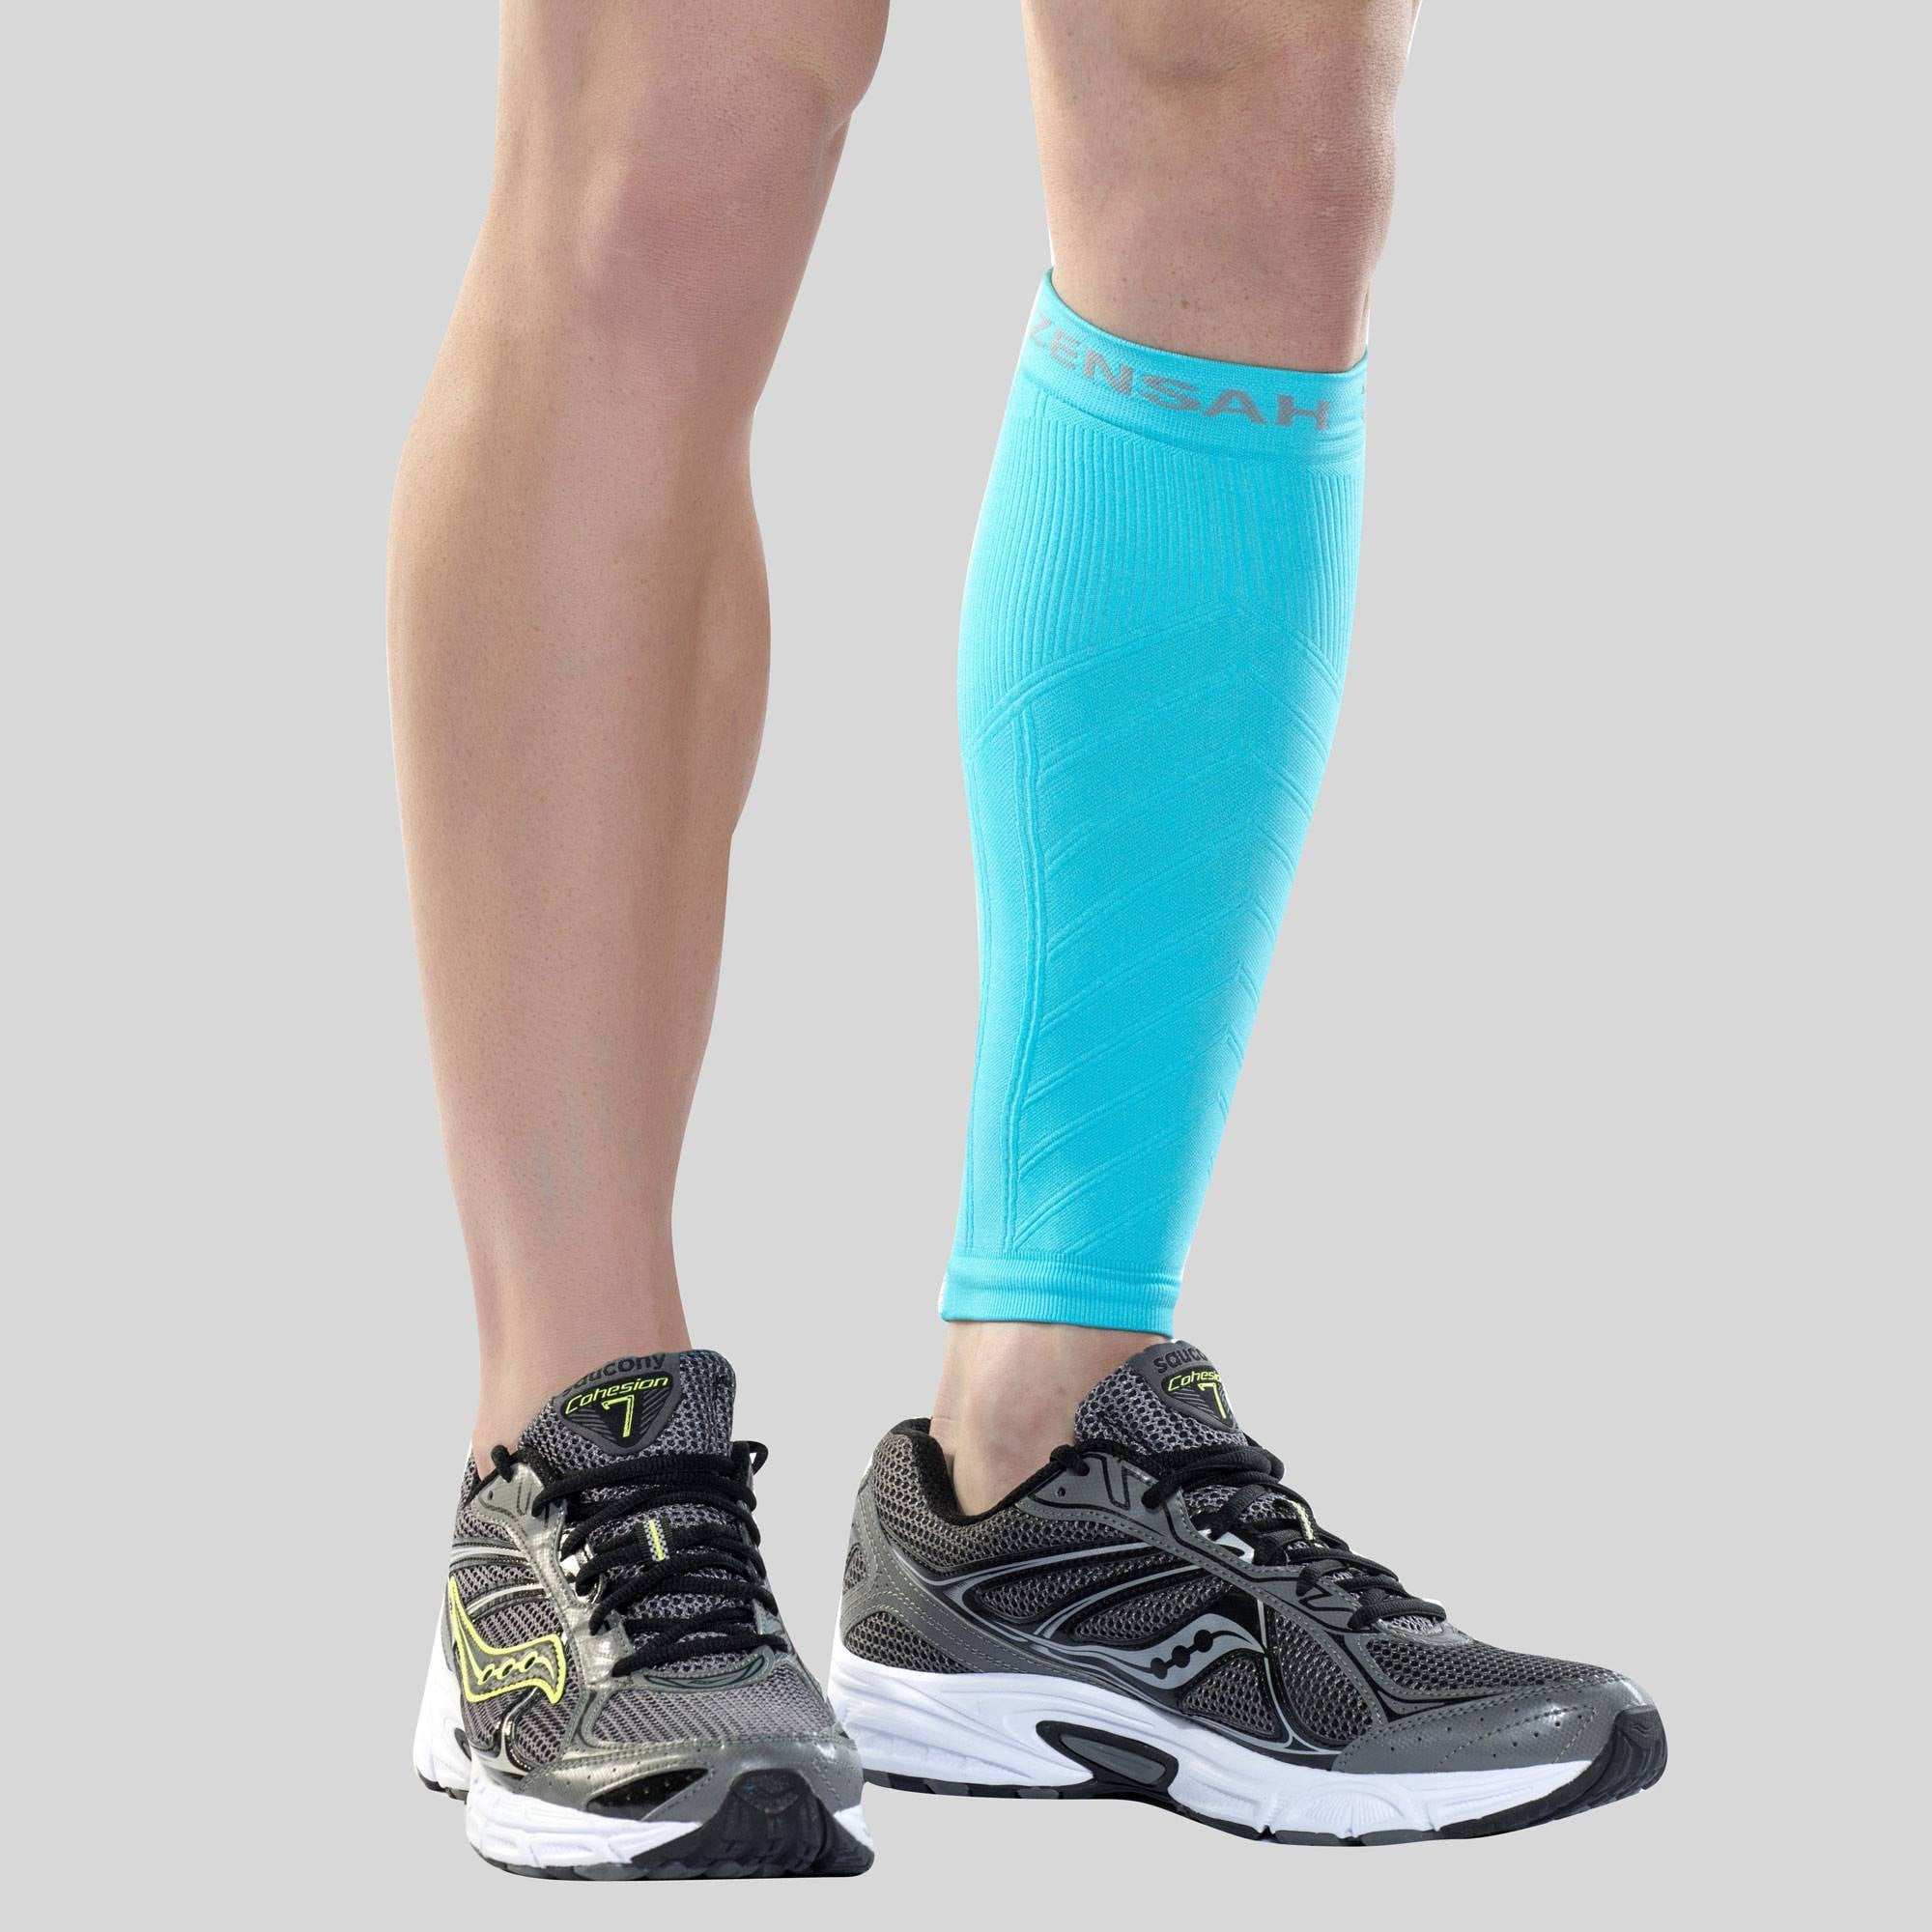 JUST RIDER Sports Calf Compression Sleeve - Shin Splint Leg Compression  Socks for Men & Women - Our Best Calf Sleeves for Running Cycling Air  Travel